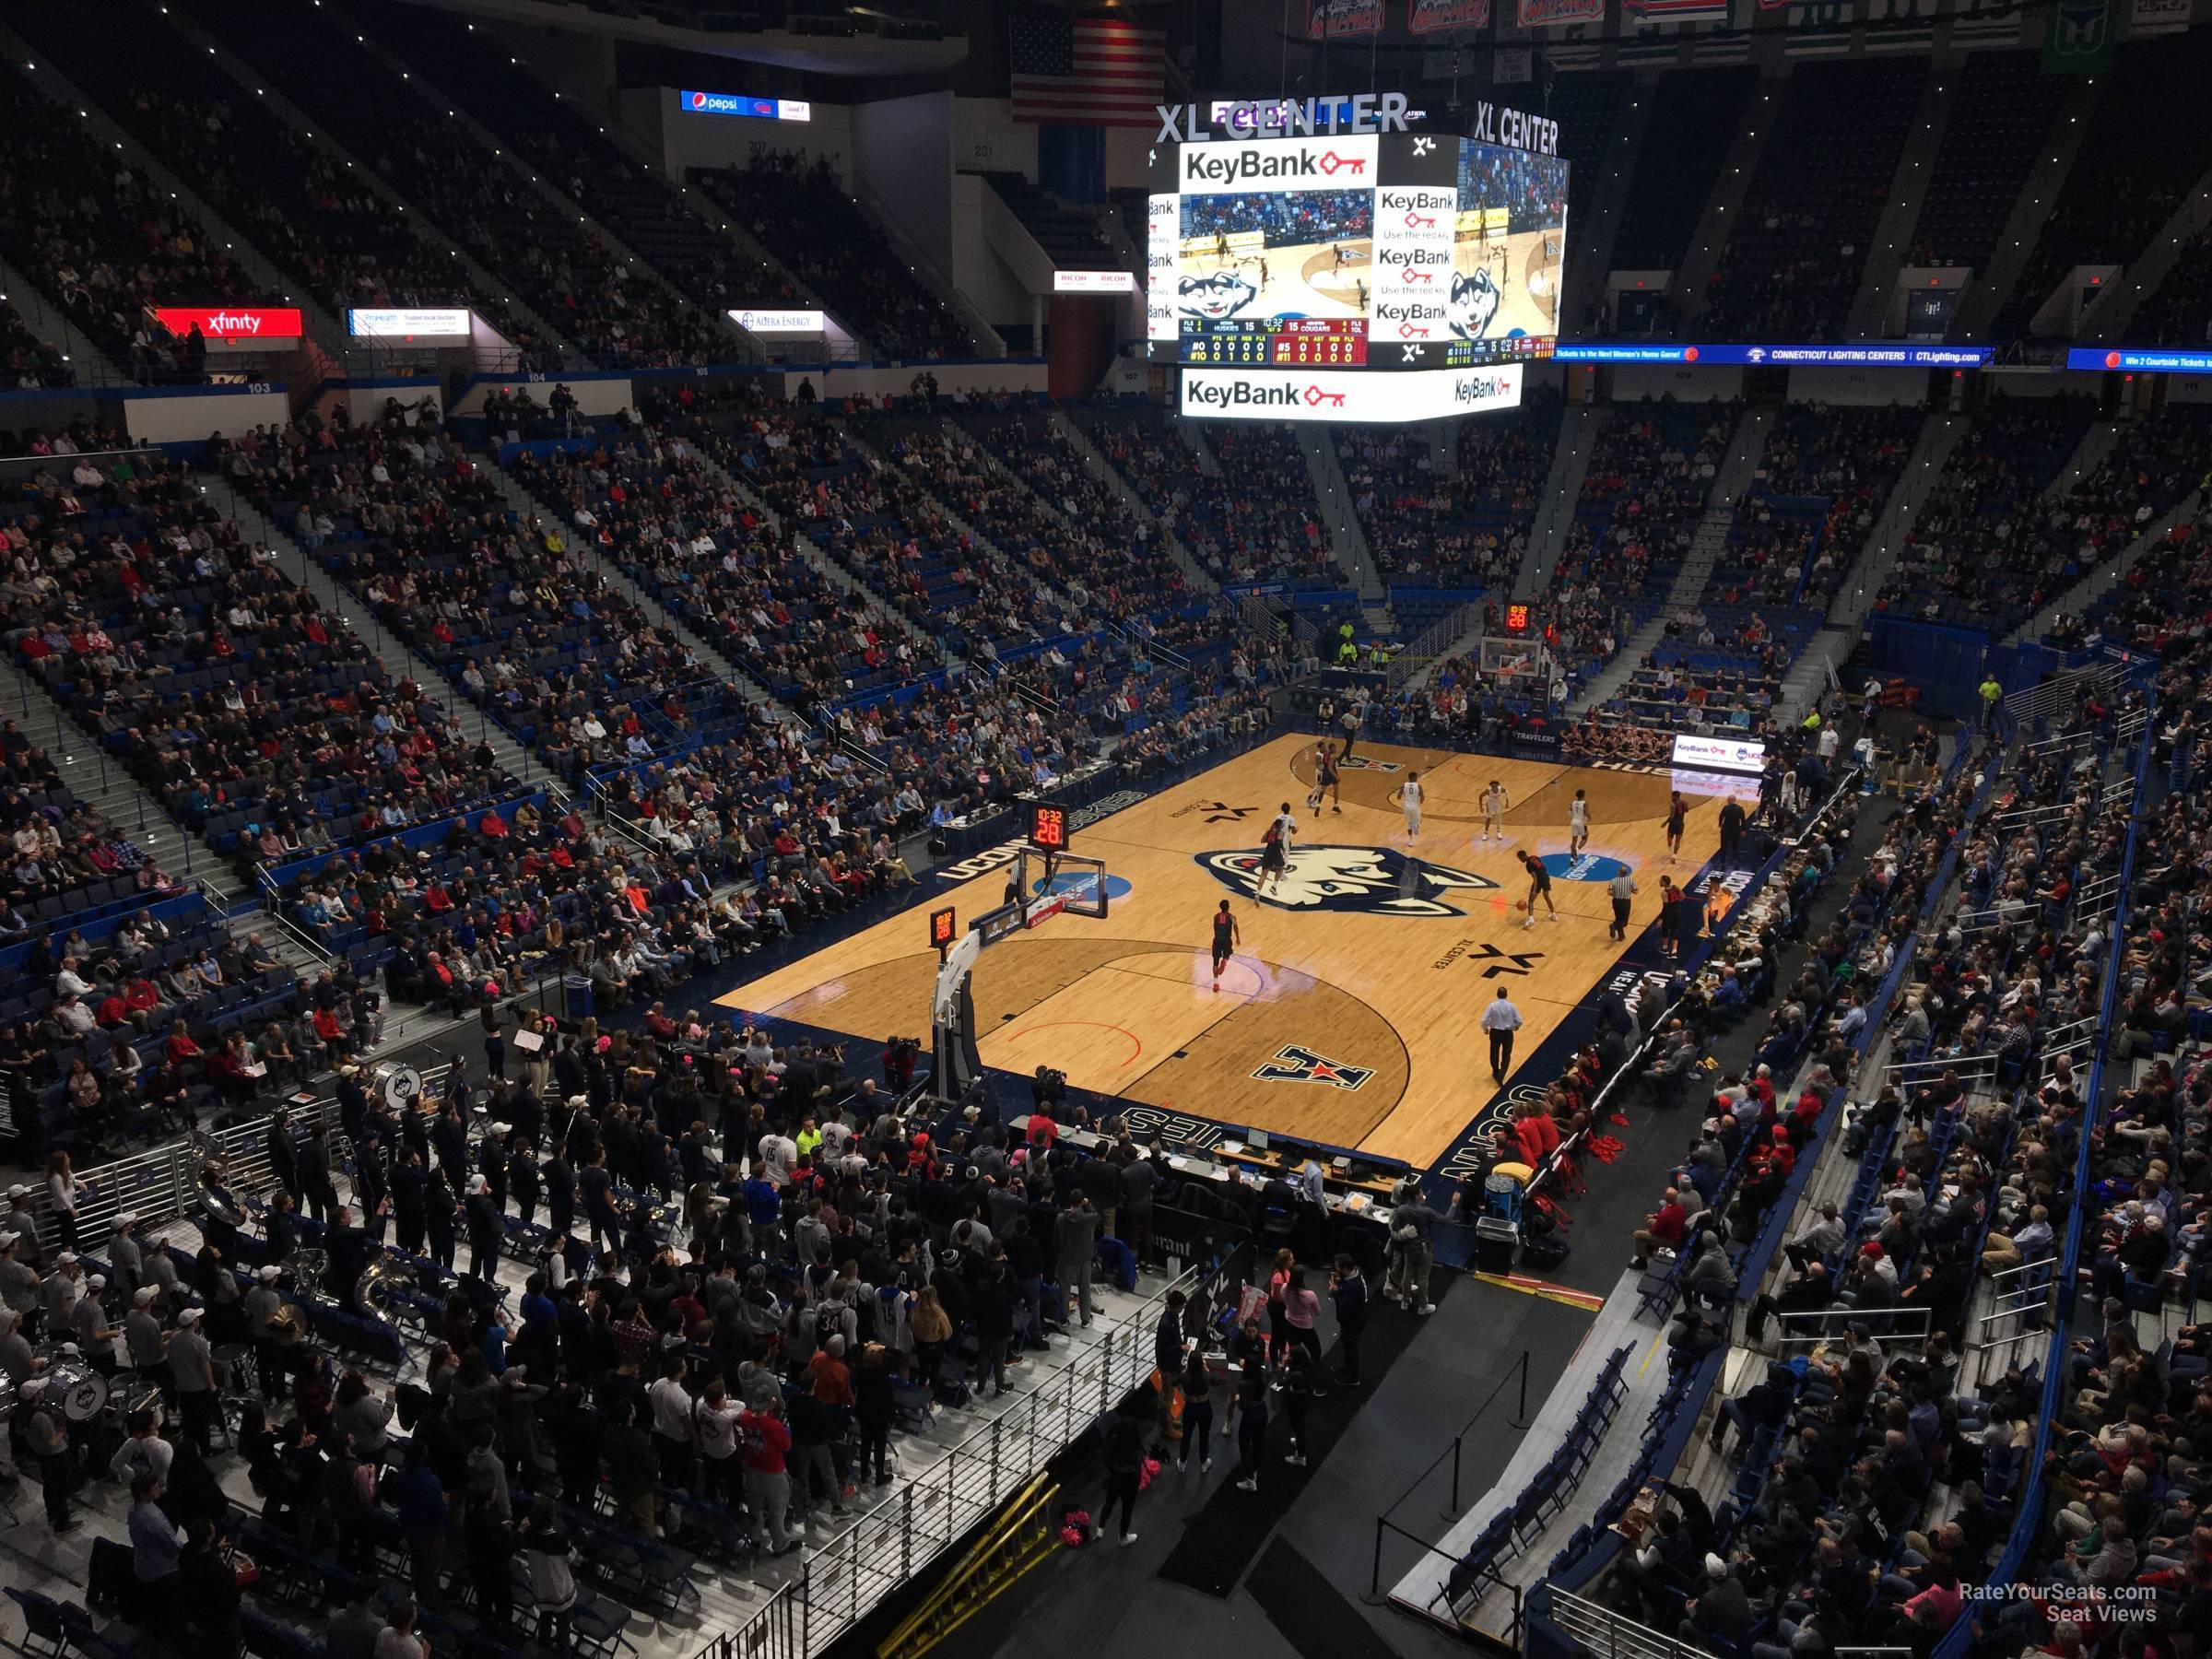 section 221, row a seat view  - xl center